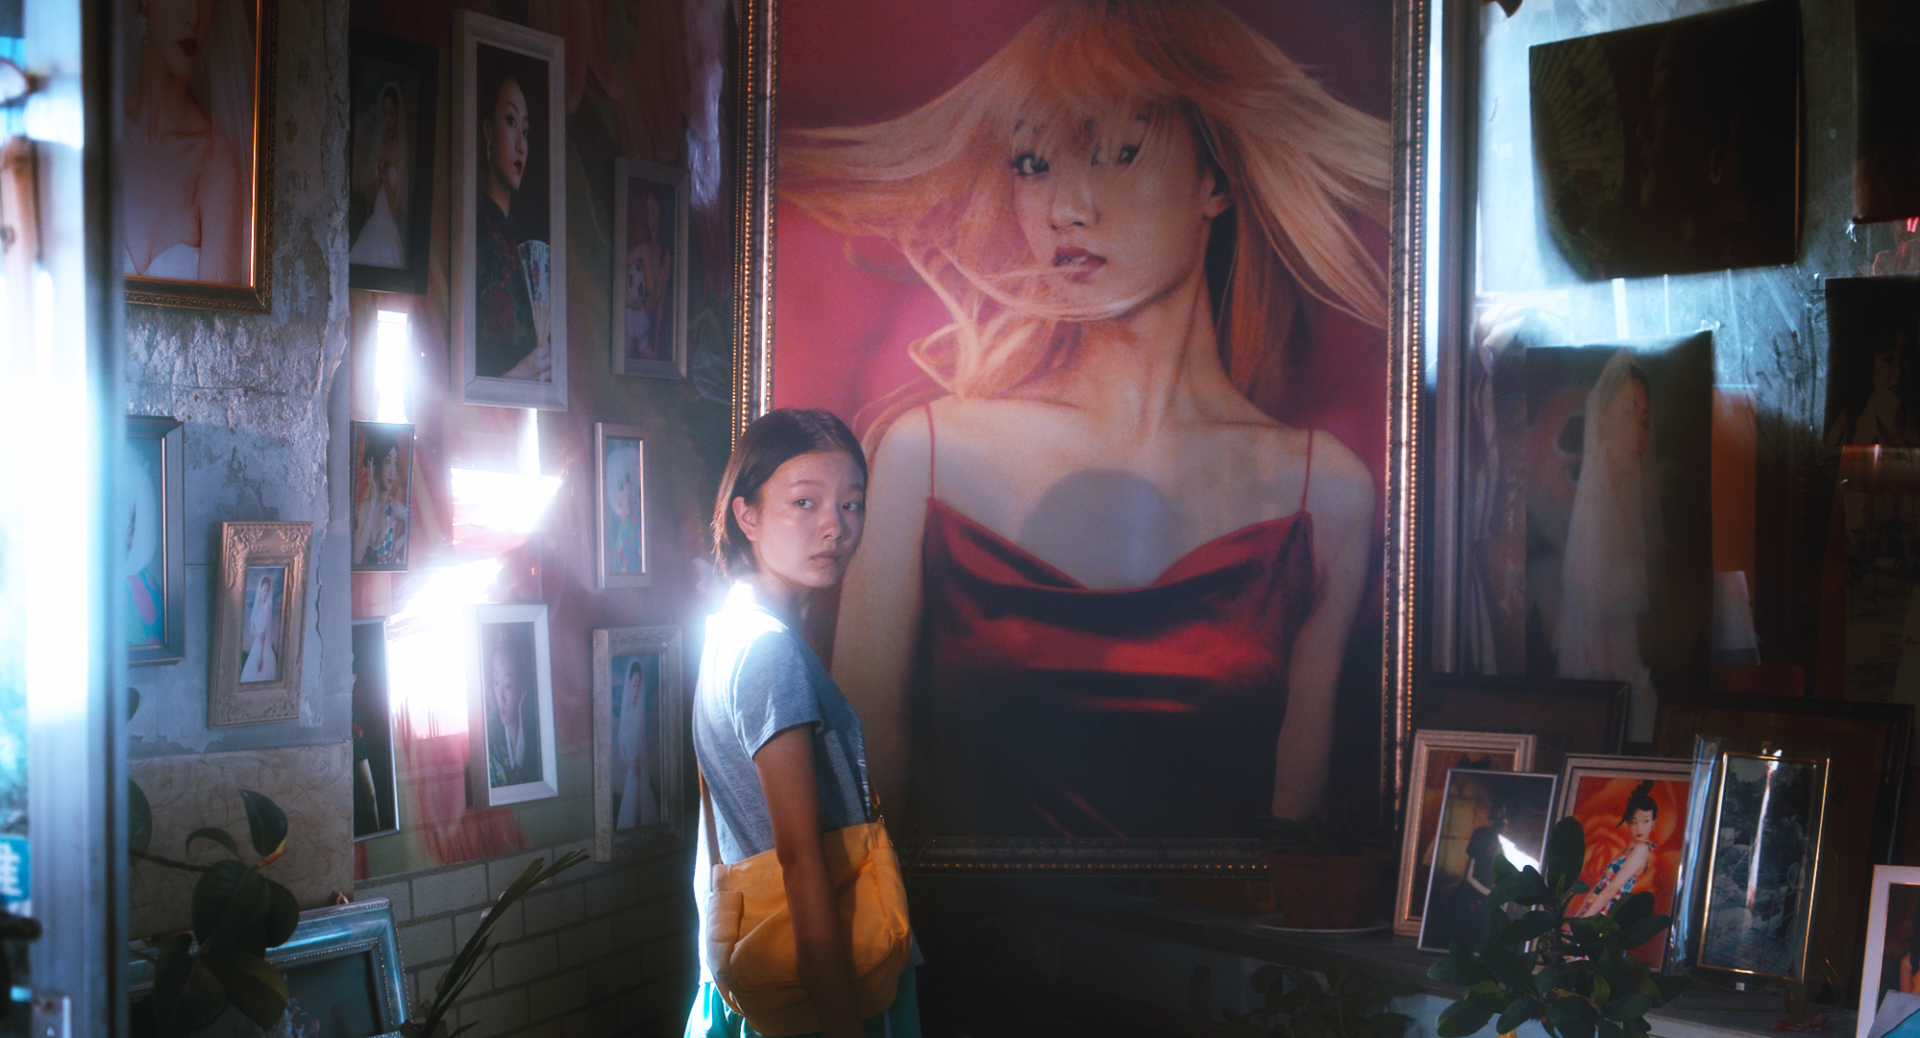 A still from A Song Sung Blue. Liu Xian, a young Chinese girl, is standing in front of many different photographs, including a large one of a woman wearing a blonde wig. The lighting is very luminous.